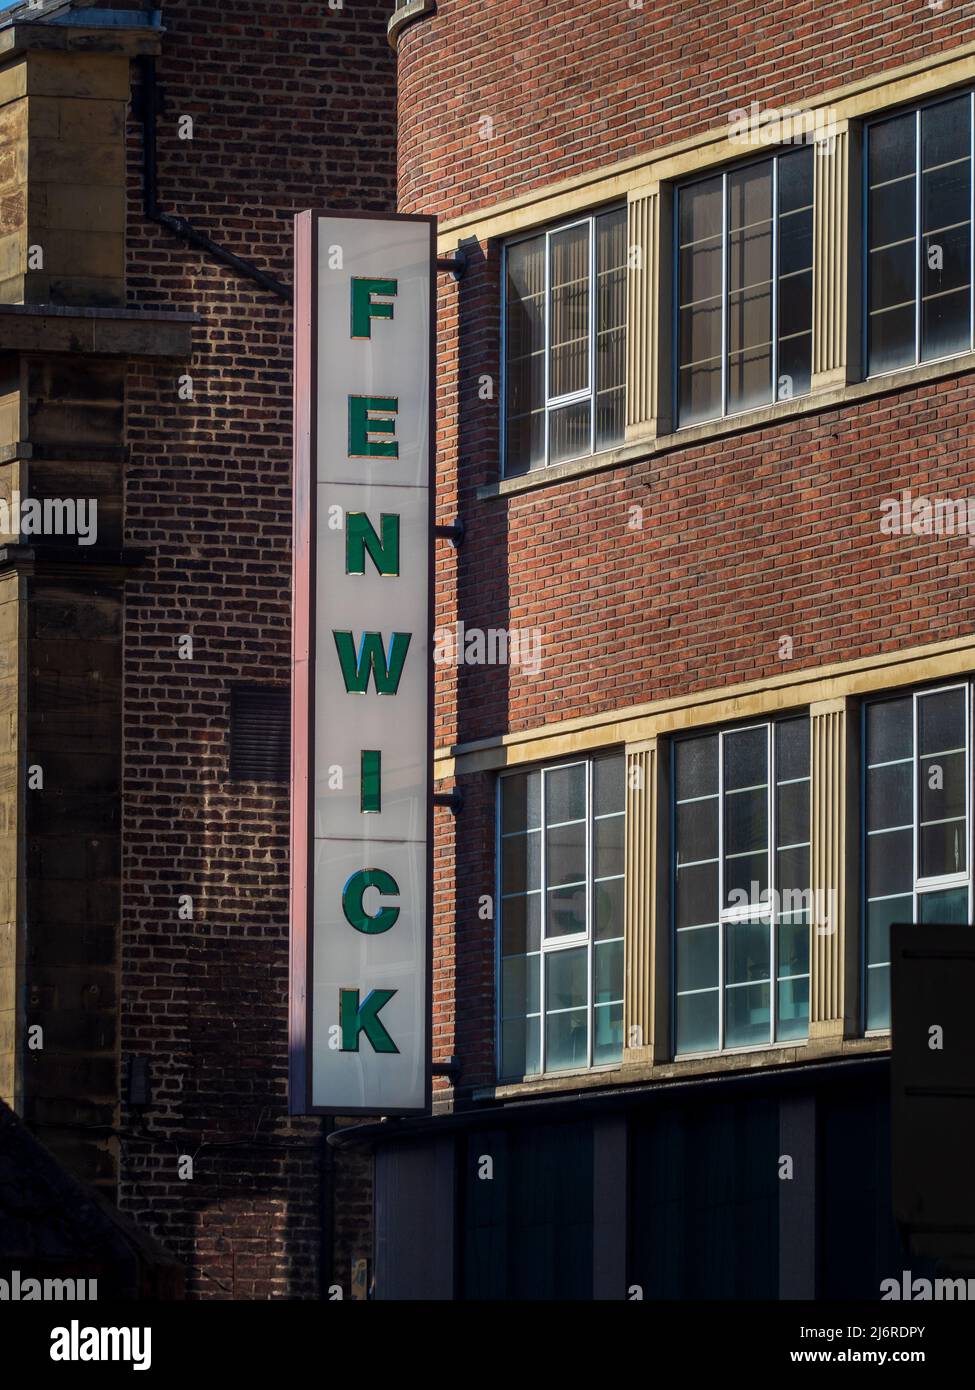 Fenwick department store sign & frontage Stock Photo